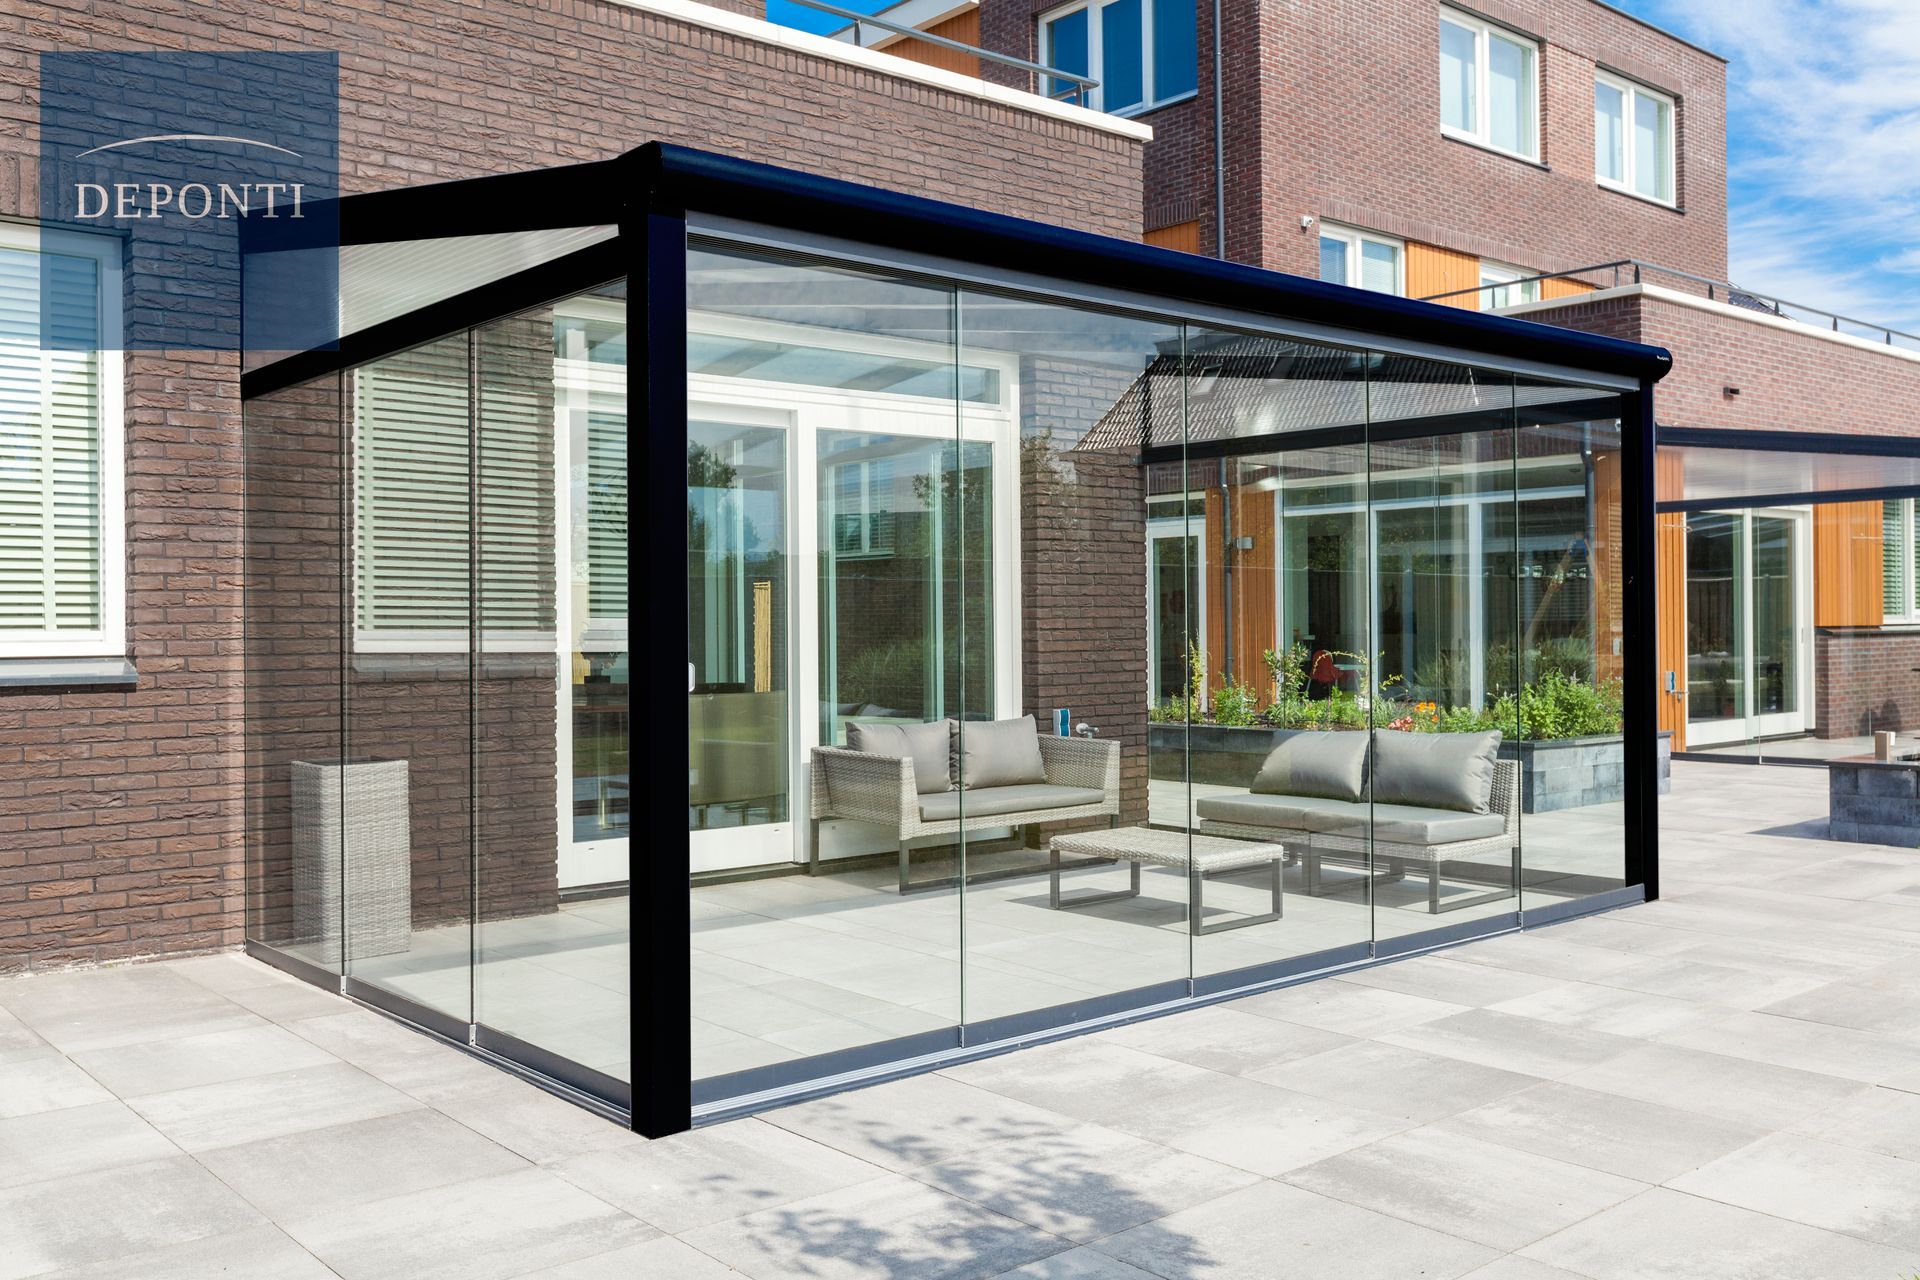 Premium Deponti aluminium veranda with glass sliding panels to the side and front and a table and chairs under the canopy